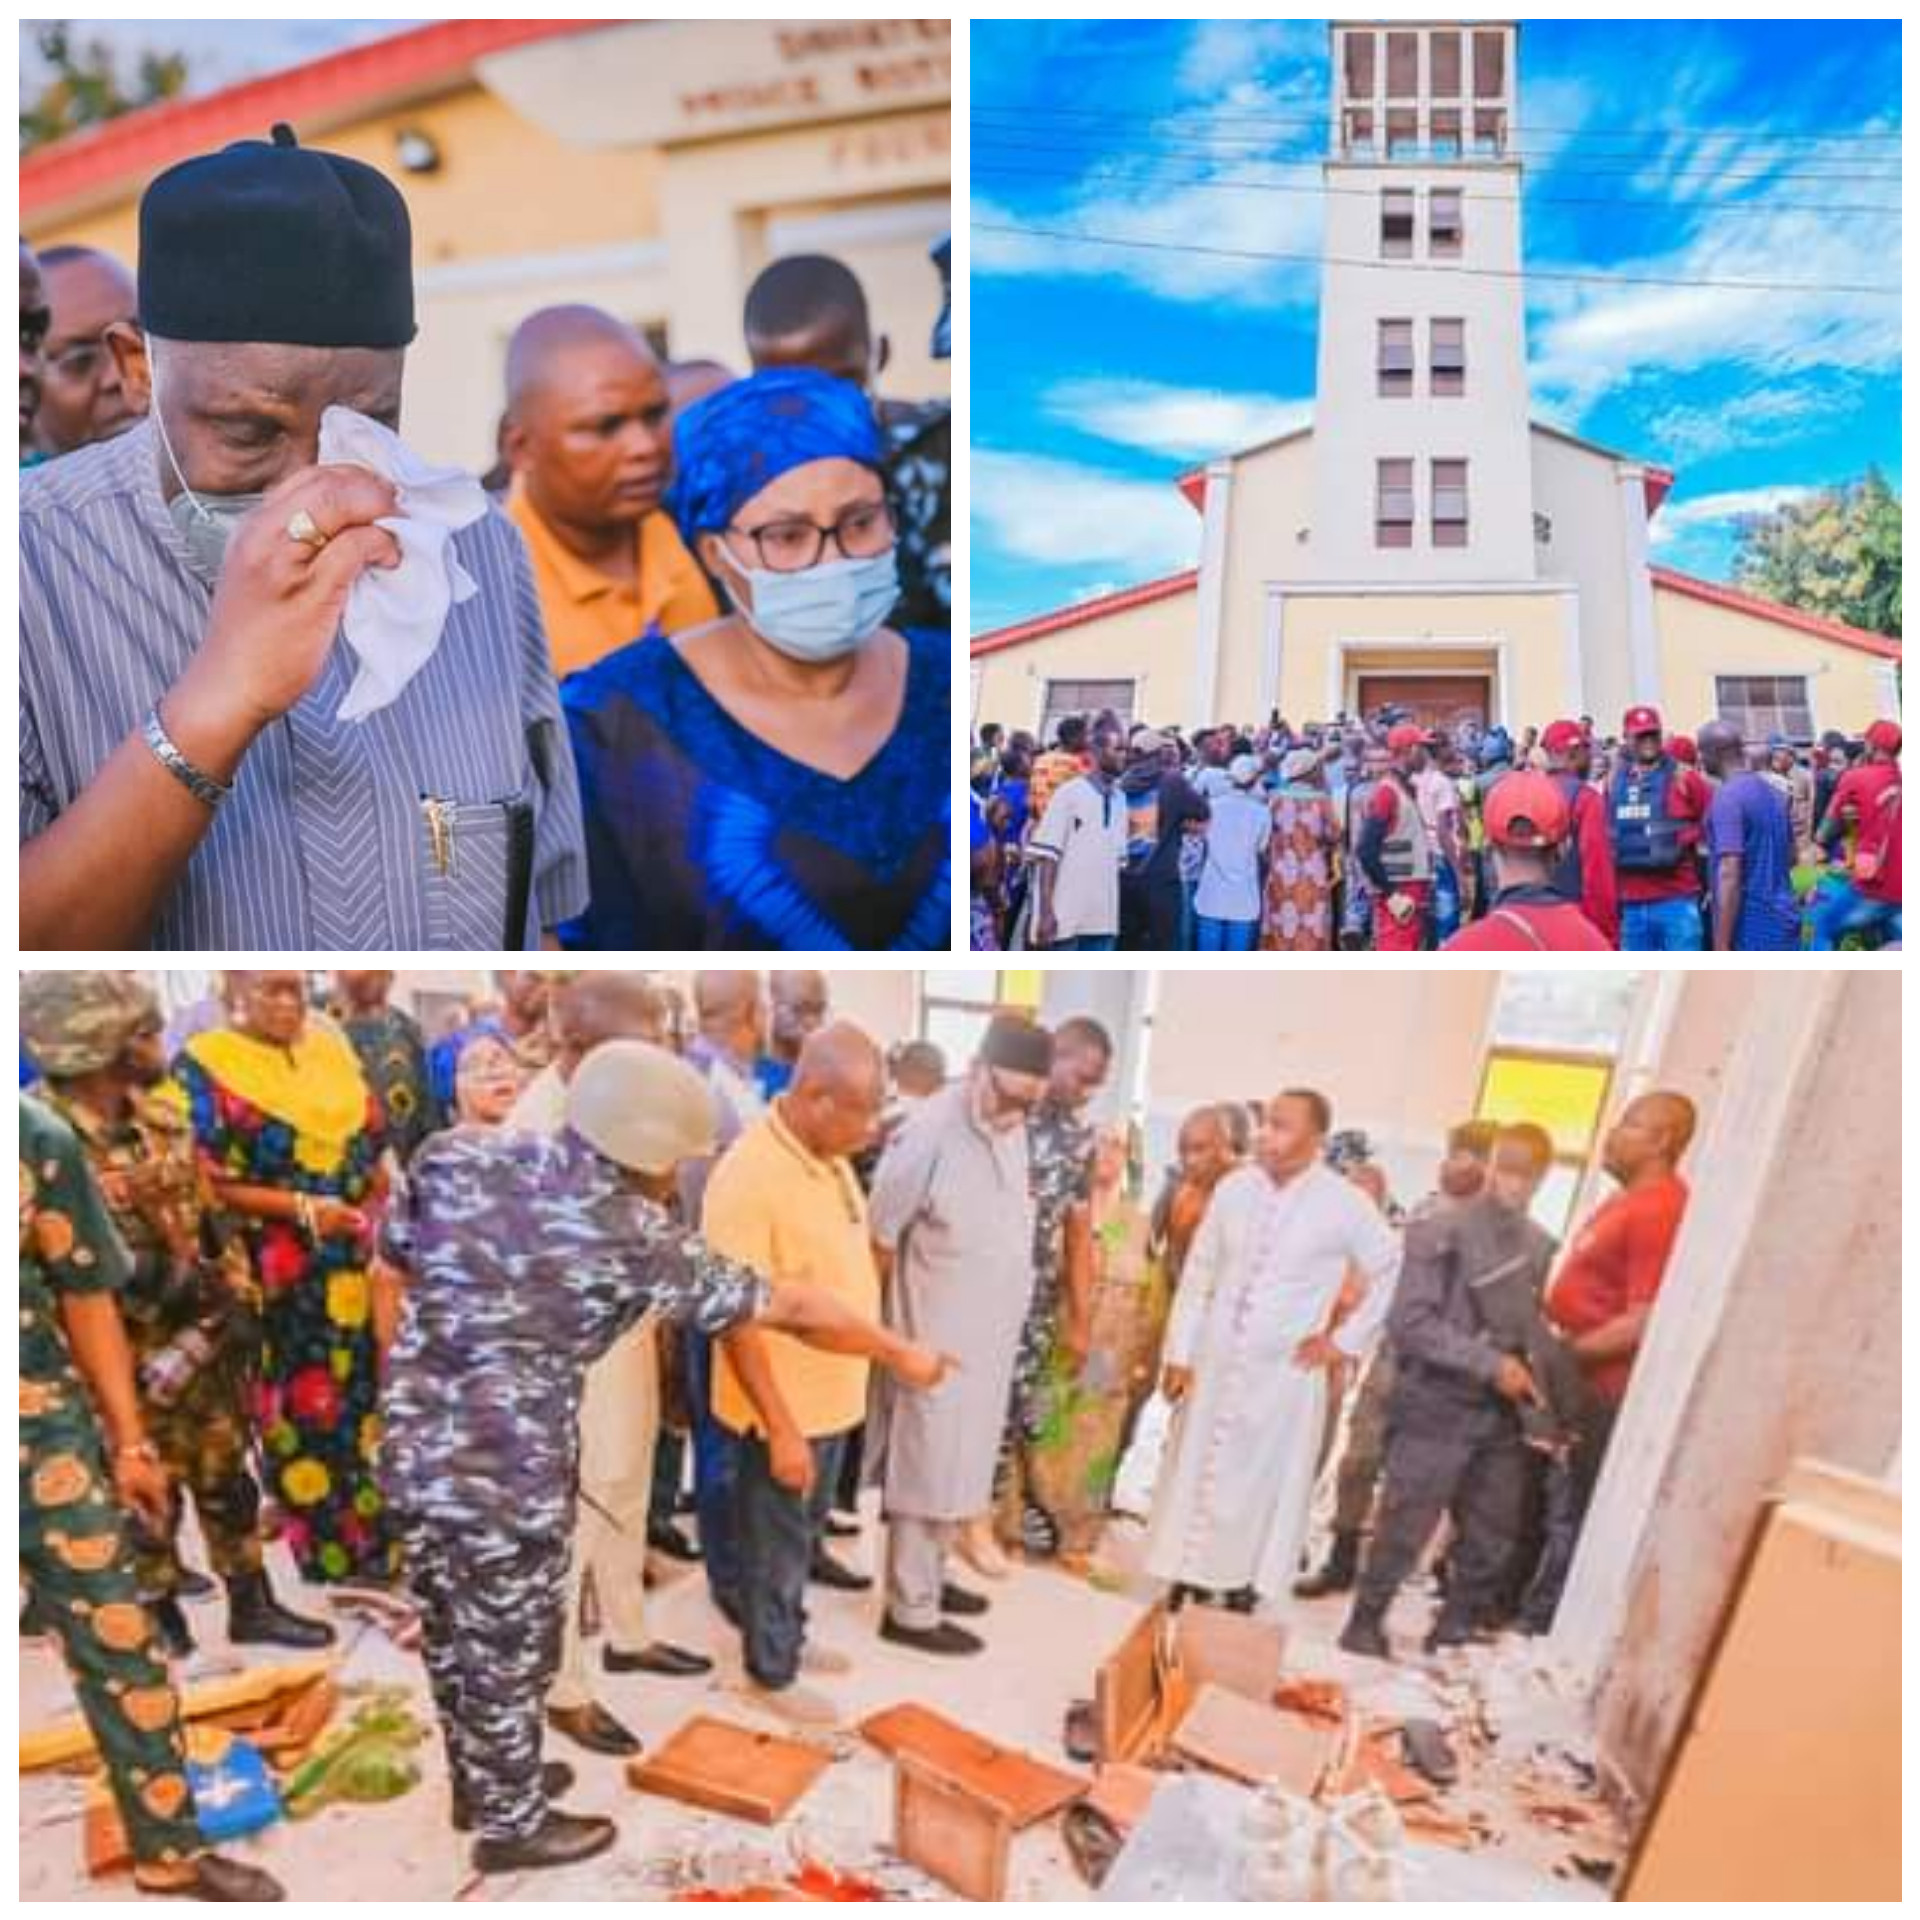 "What we have seen in America is a child play to what happened here" - Governor Akeredolu visits scene of Owo terror attack